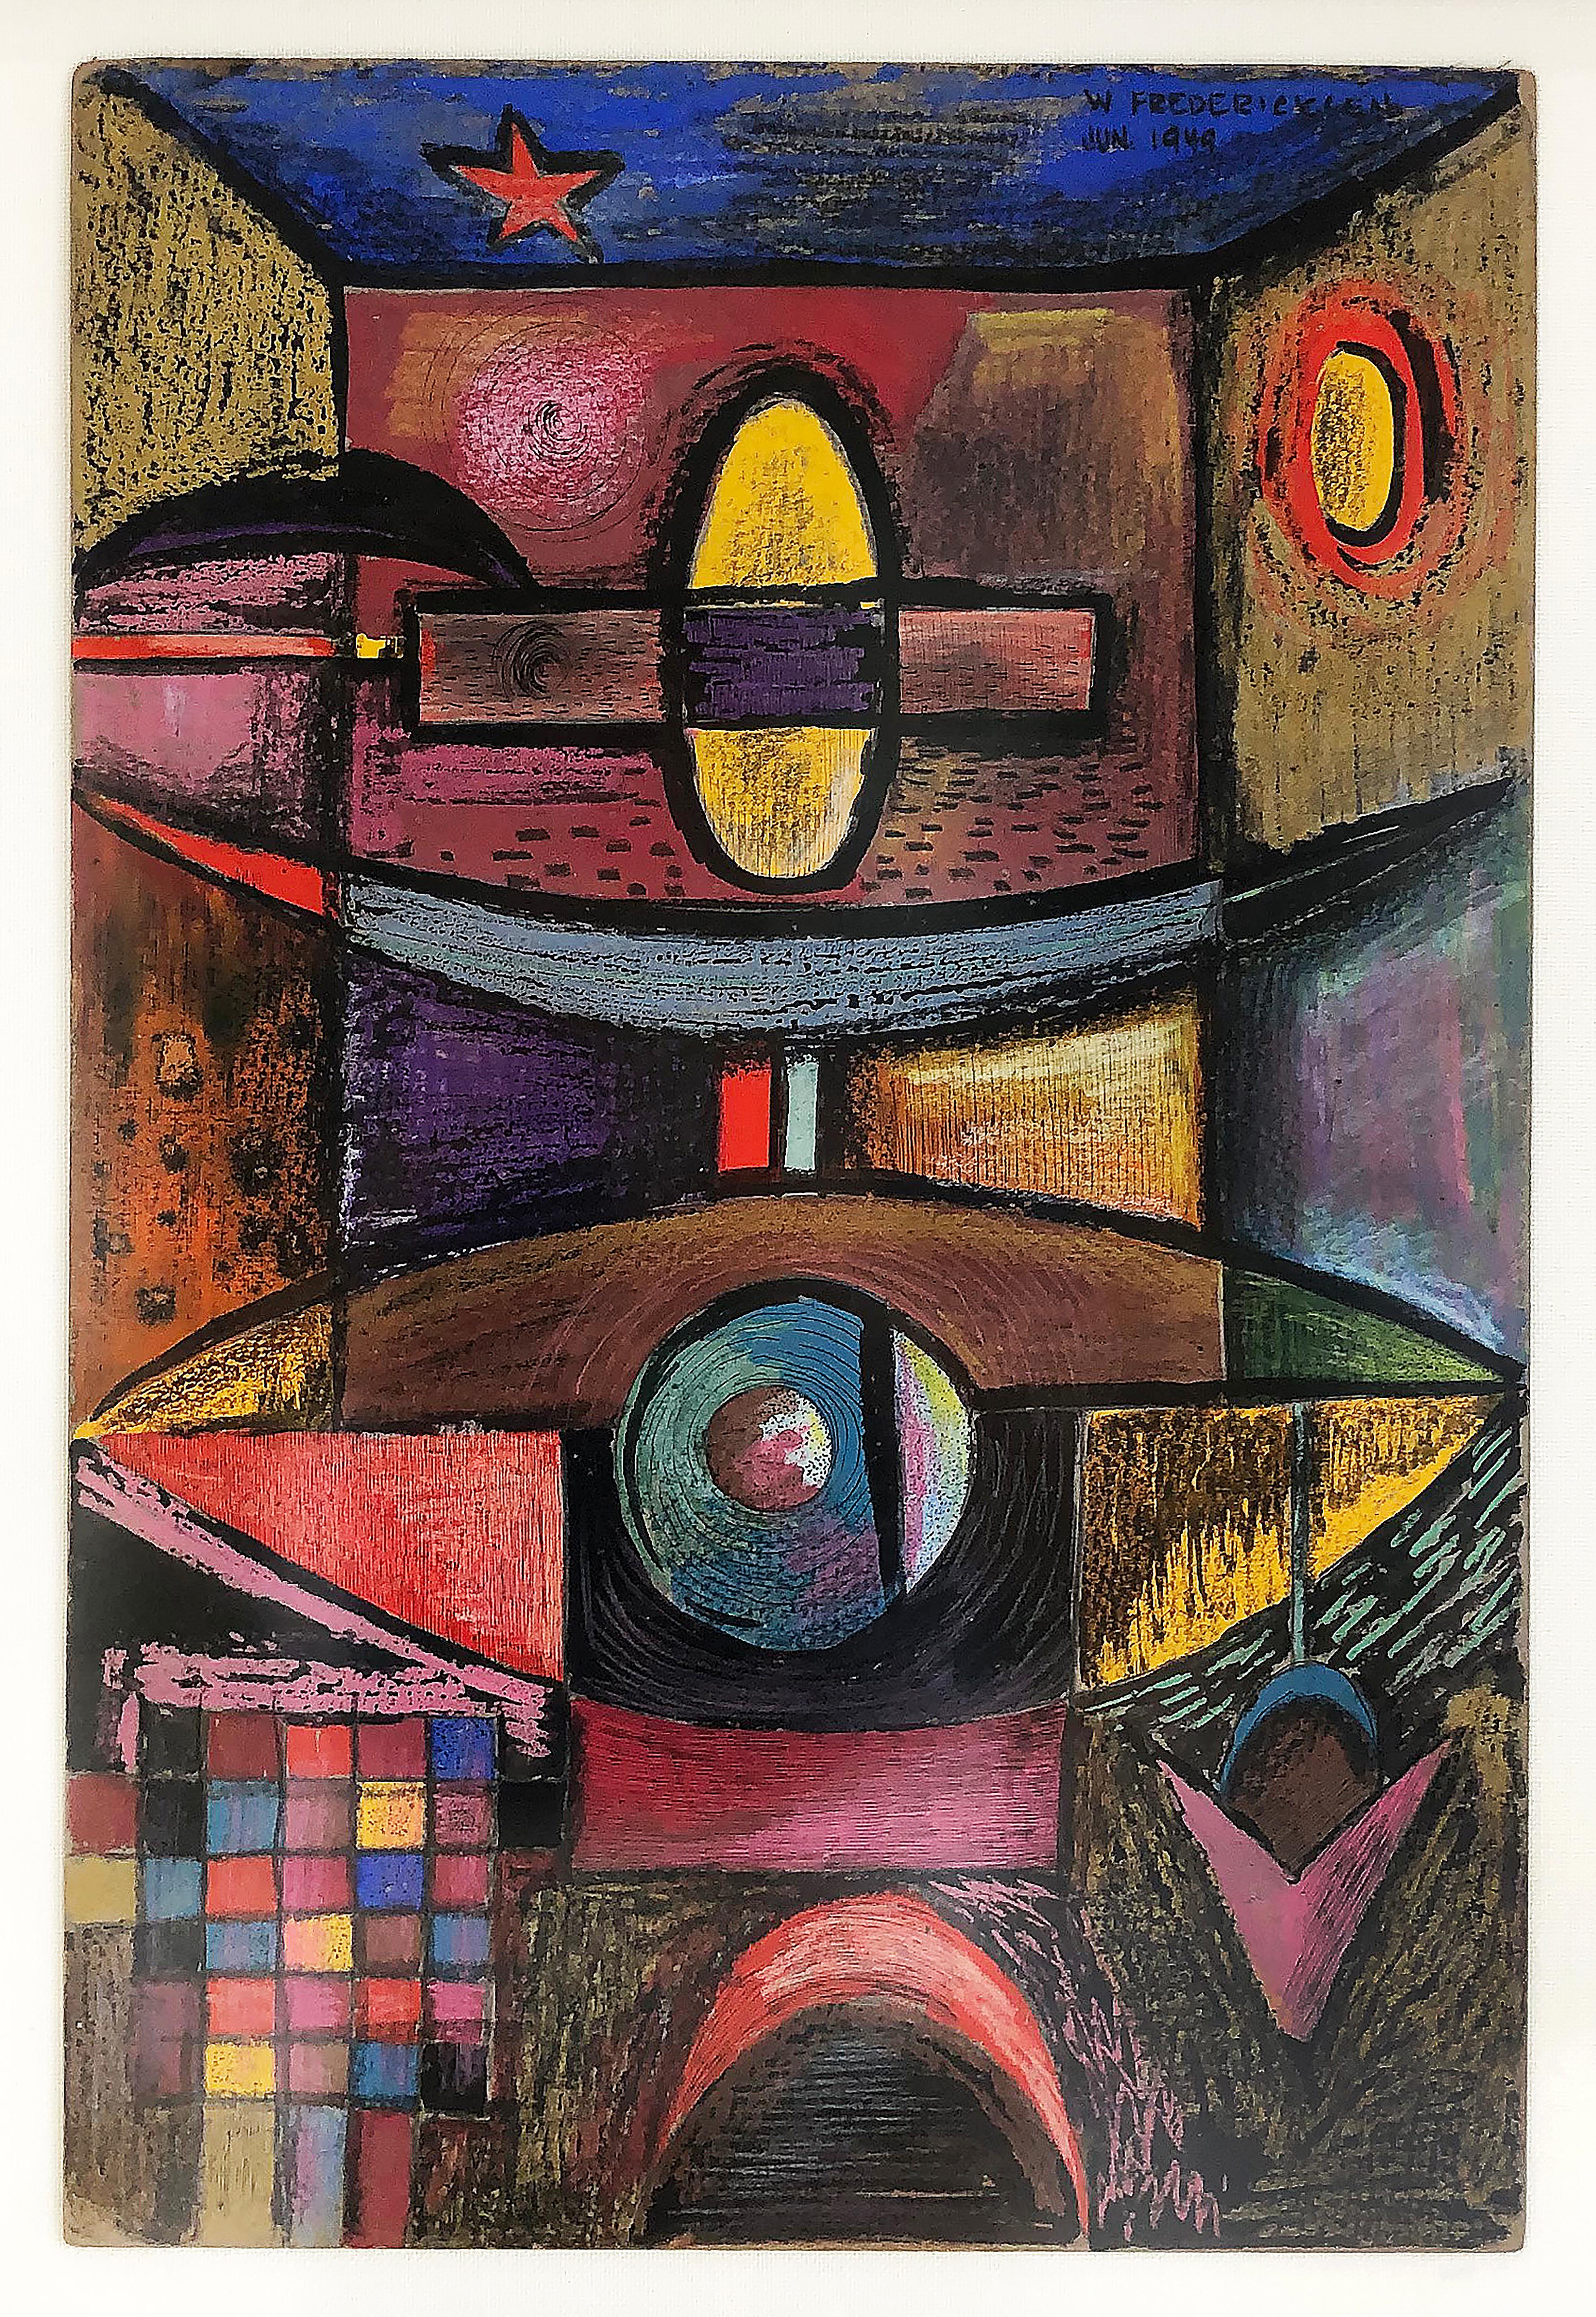 1949 W. Fredericks abstract cubist pastel drawing 

Offered for sale is an original 1949 W. Fredericks abstract Cubist mixed-media pastel drawing on paper with color pencil. The drawing is bold and colorful. The work floats on a mat and is displayed